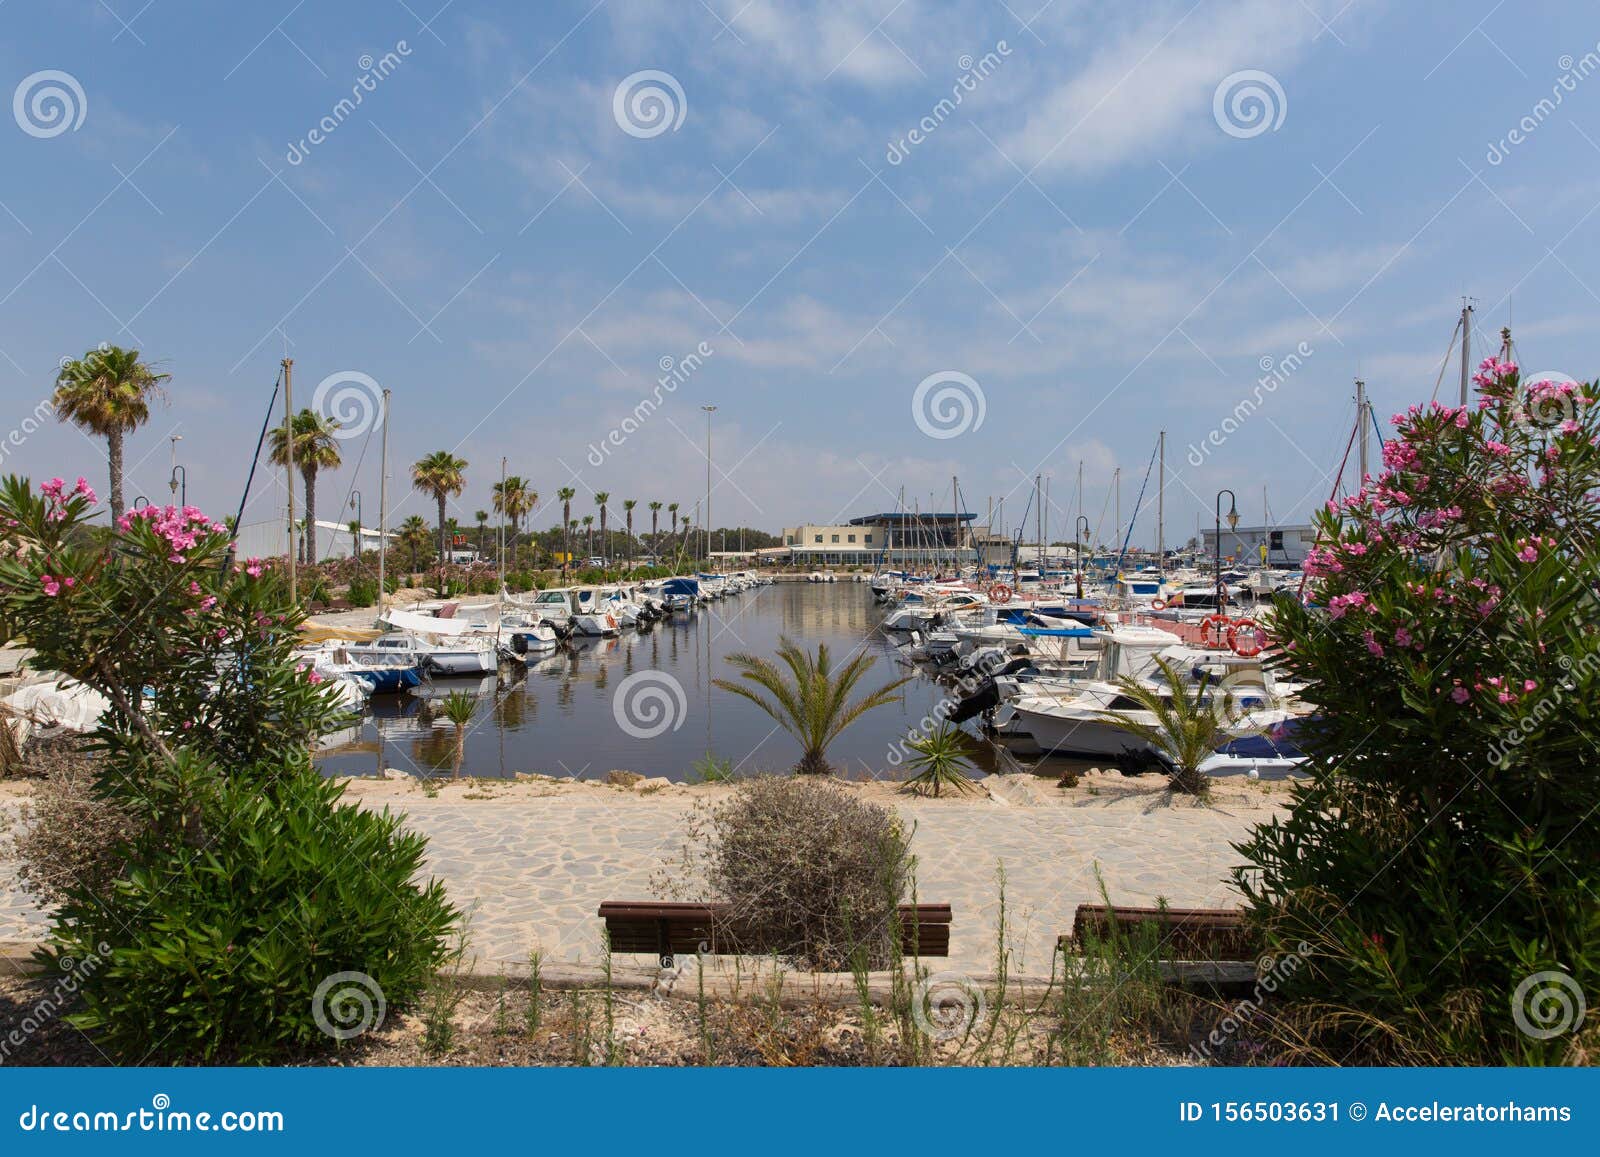 guardamar del segura marina dunas with boats and yachts and pink flowers spain